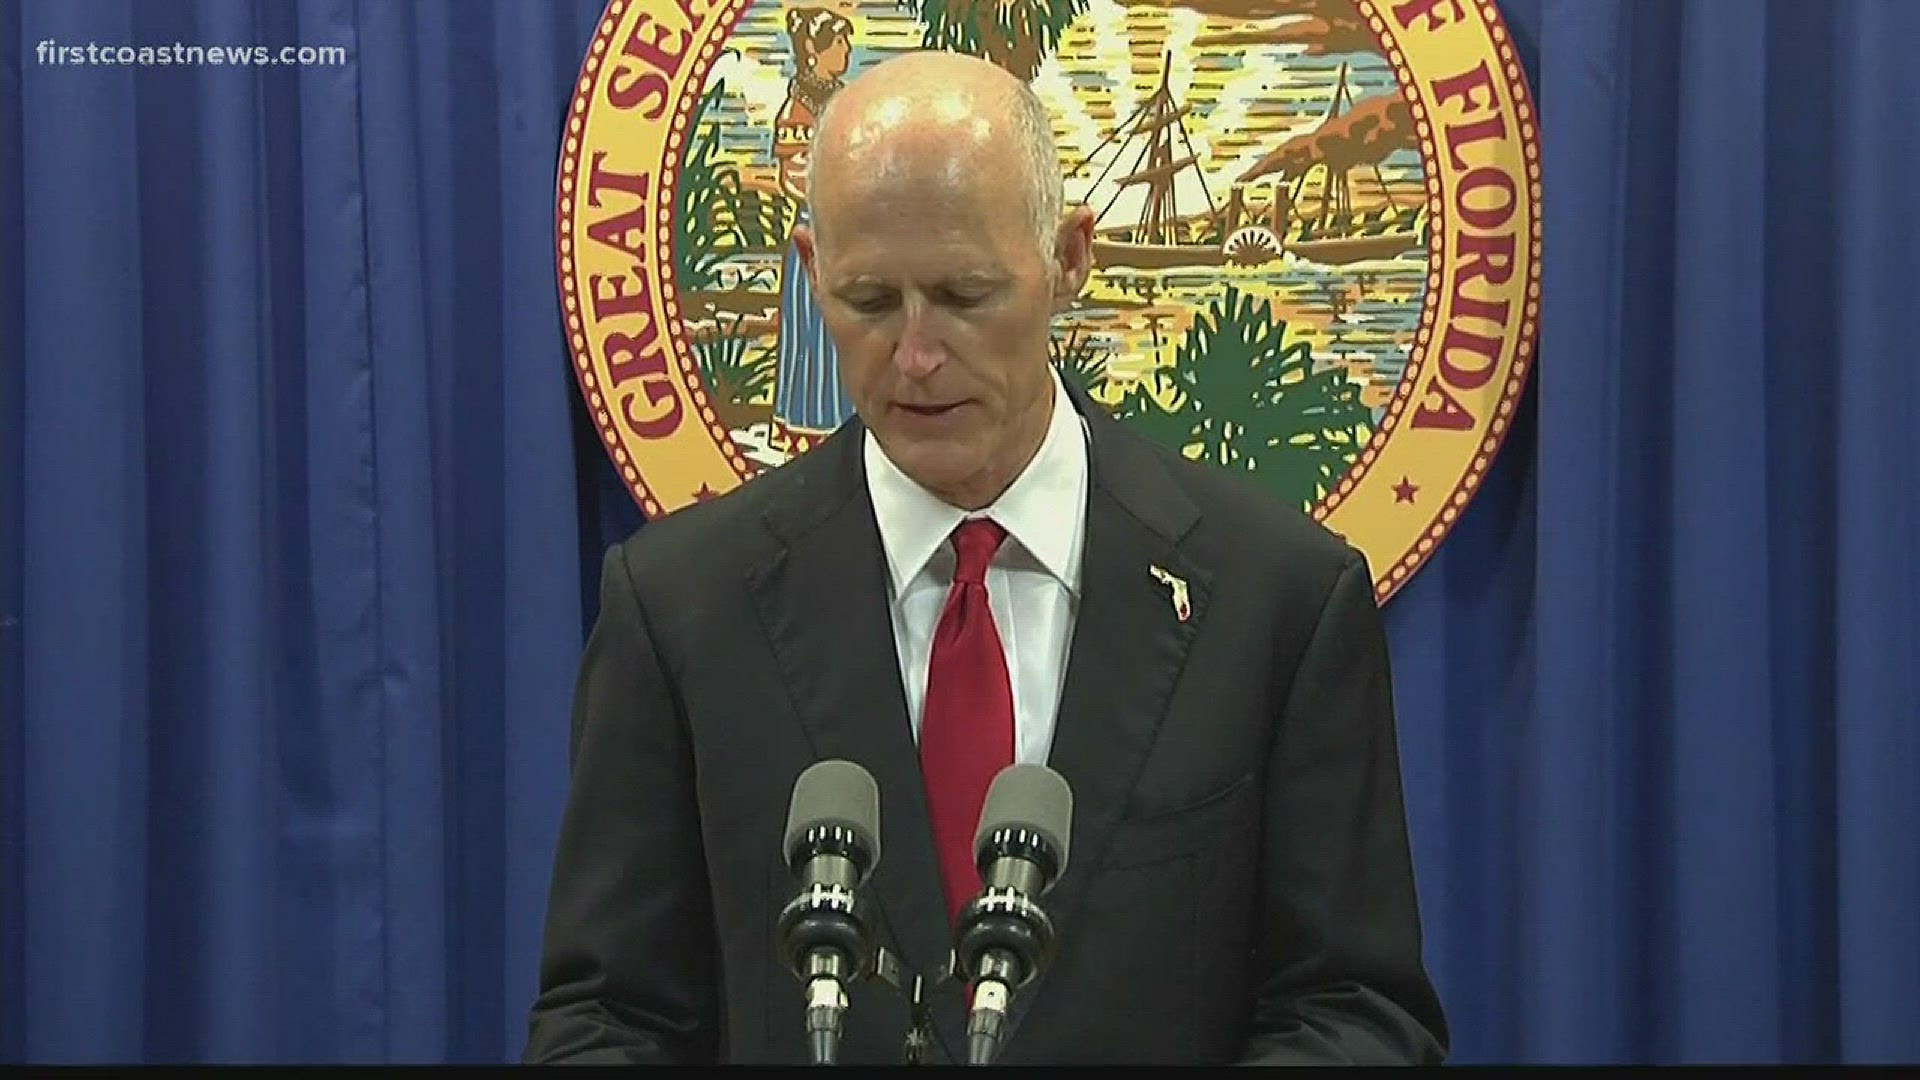 The bill that was signed by Gov. Rick Scott raises the age to buy a gun from 18 to 21 and now the NRA is suing, saying it violates the 2nd Amendment.